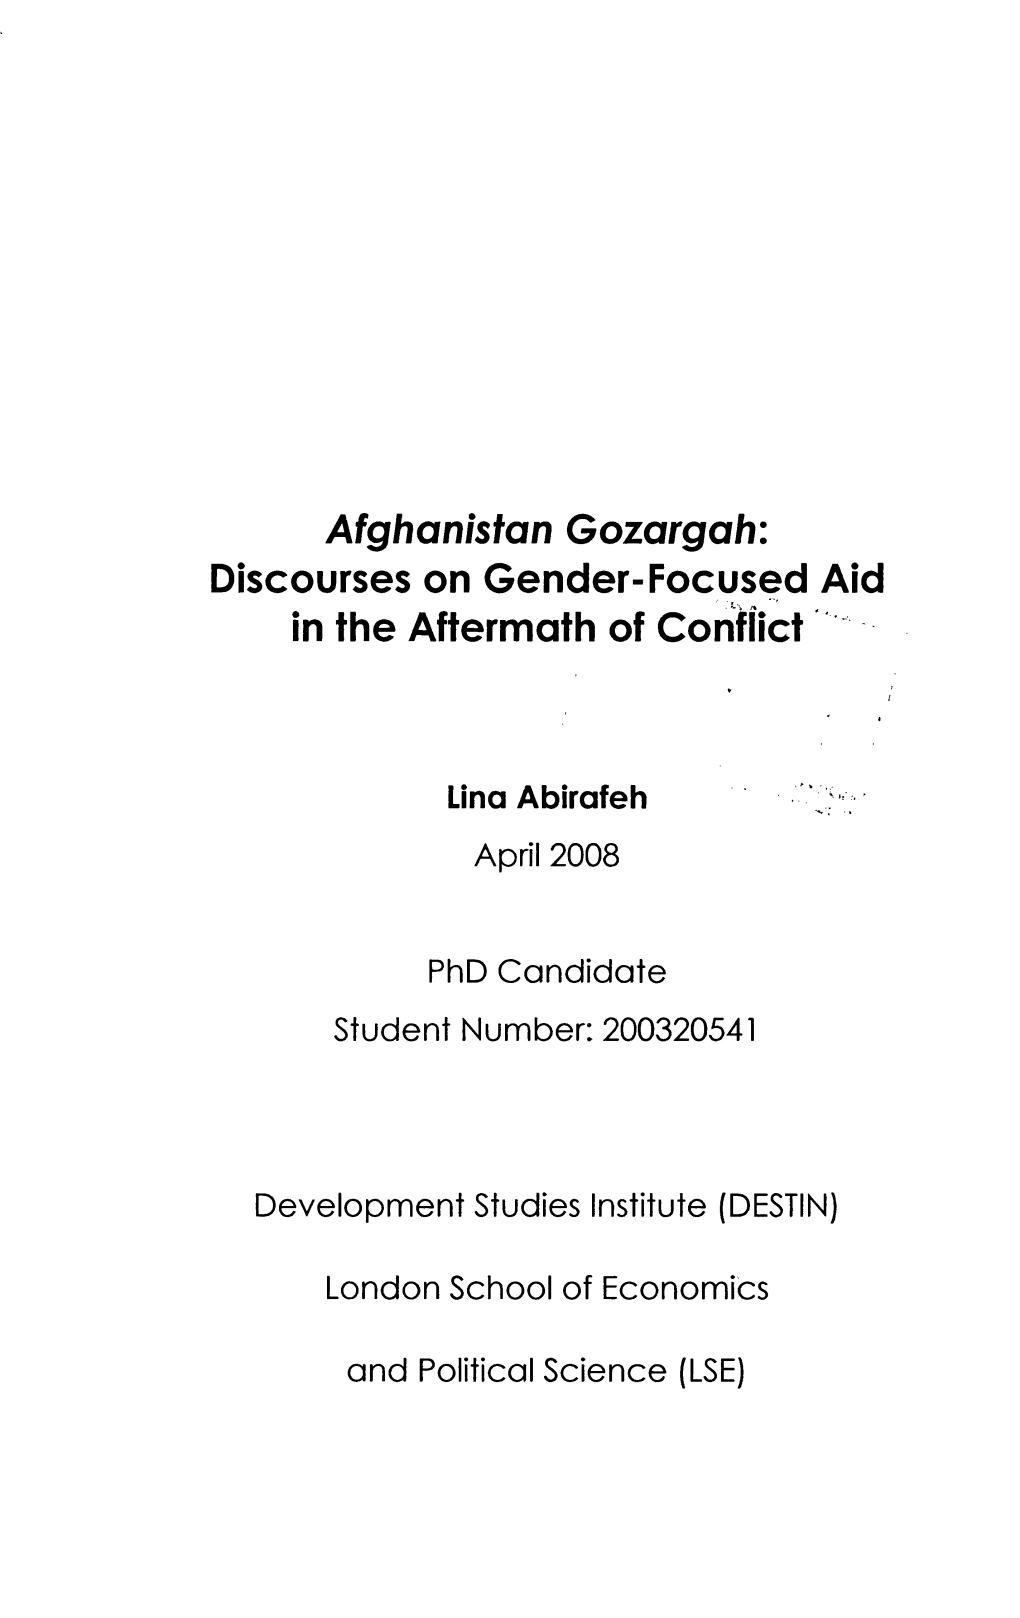 Discourses on Gender-Focused Aid in the Aftermath of Conflict